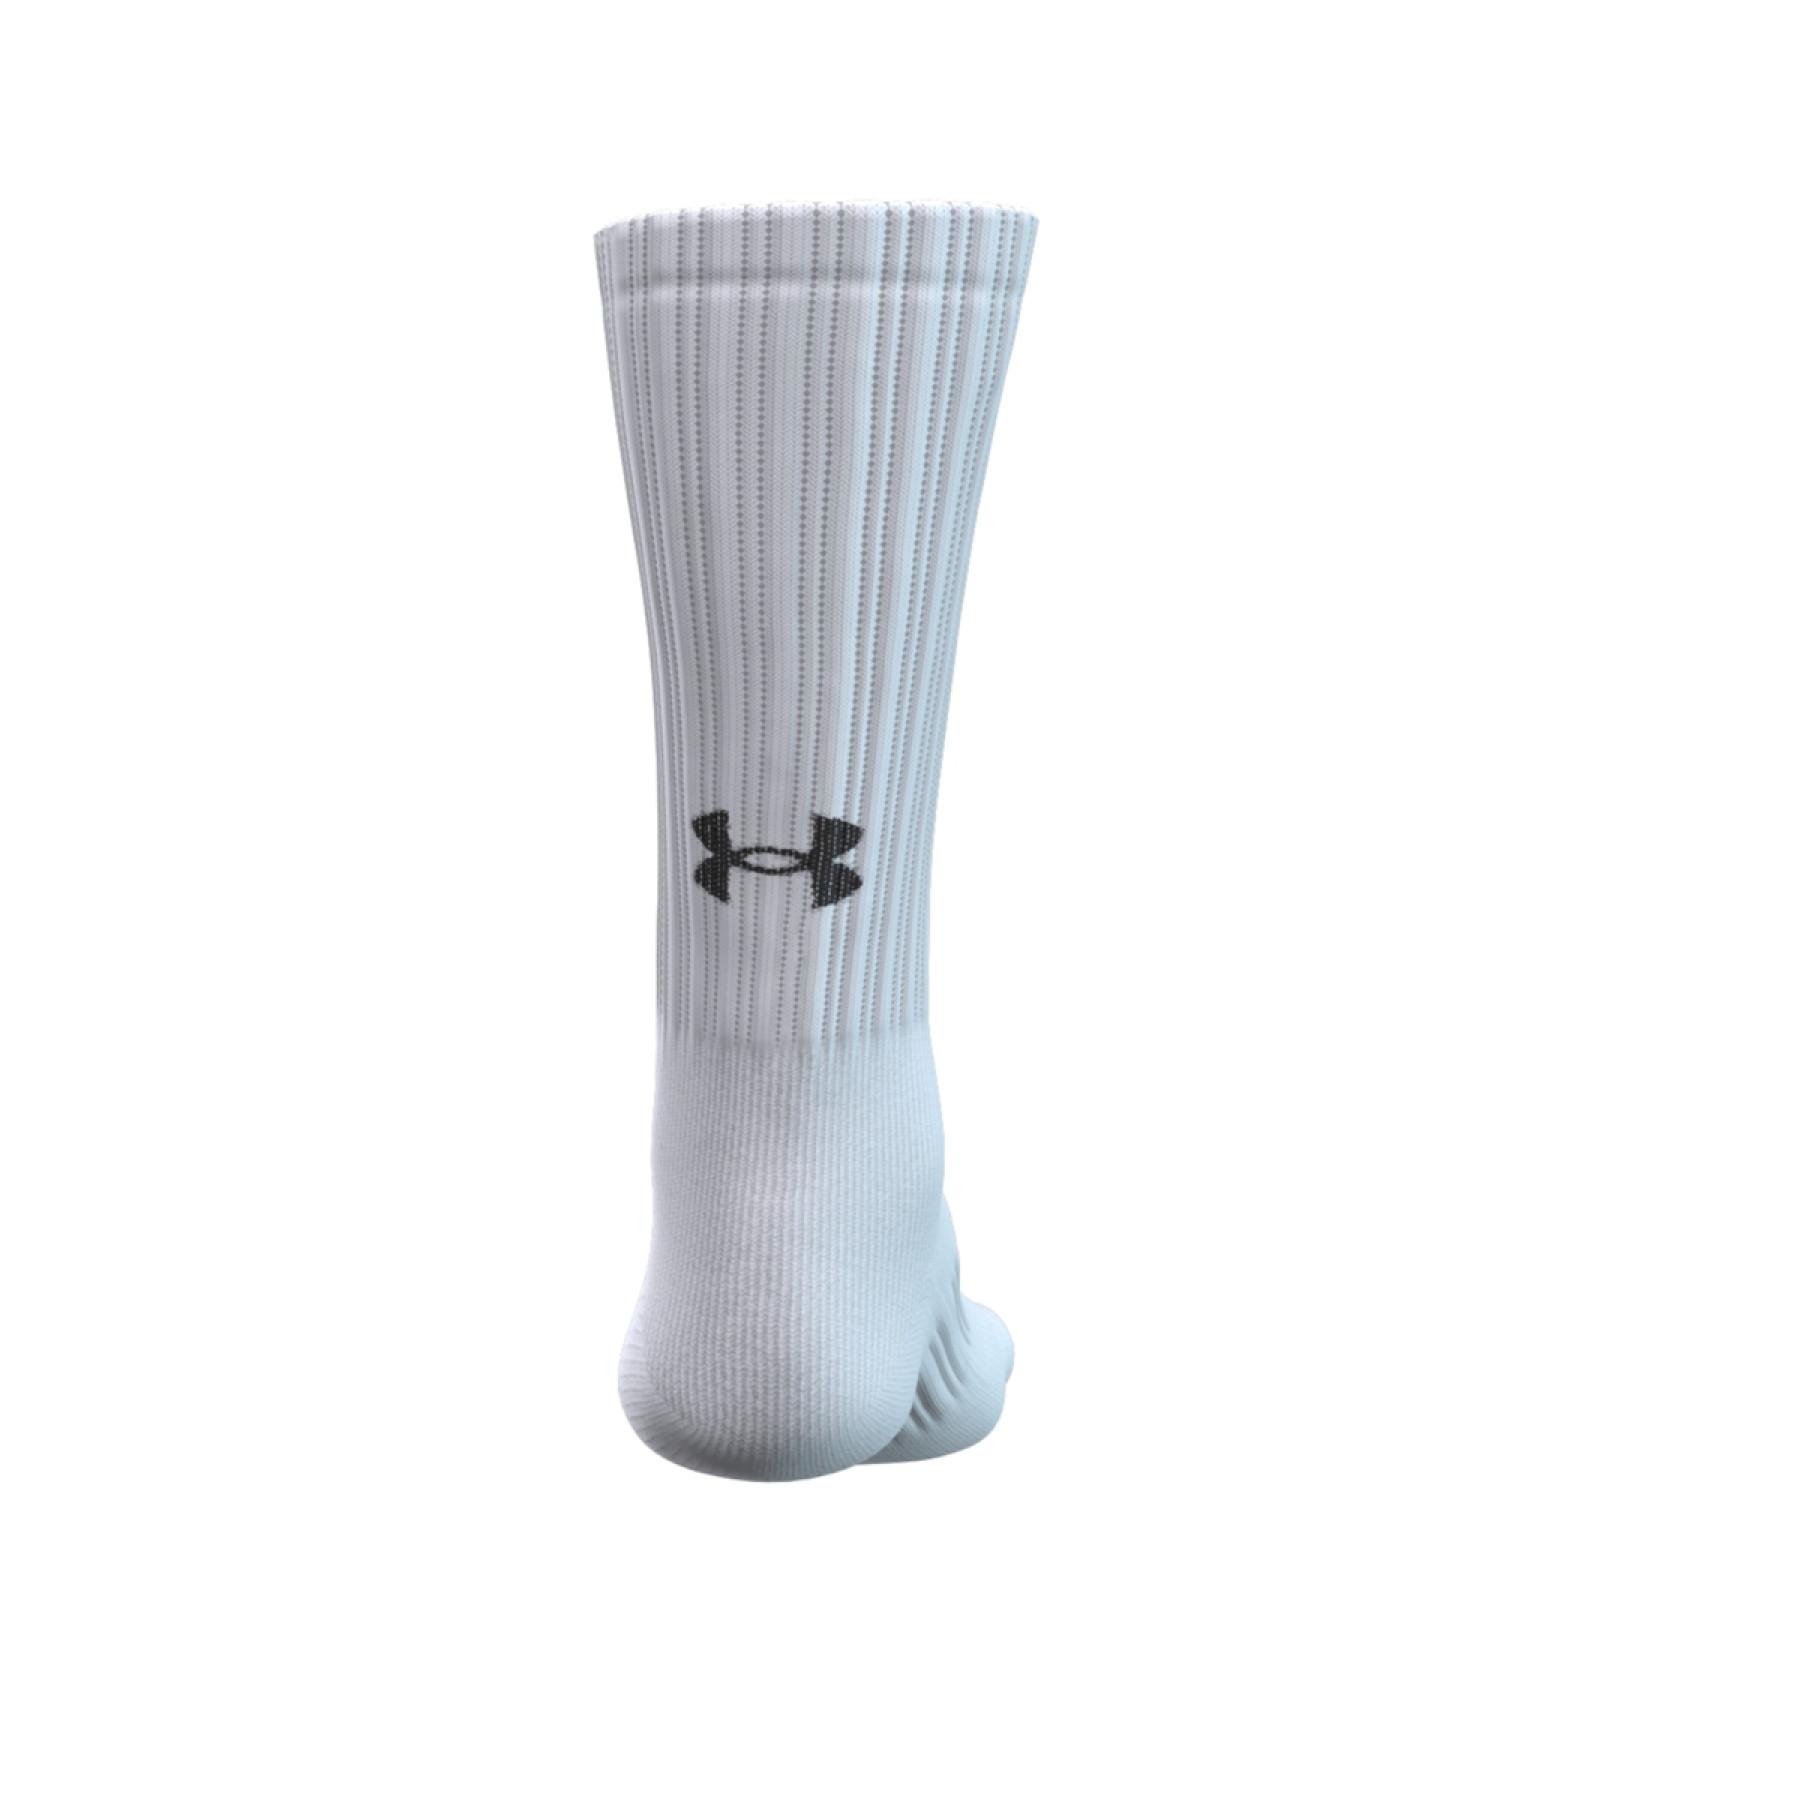 Set of 3 pairs of high socks Under Armour Core